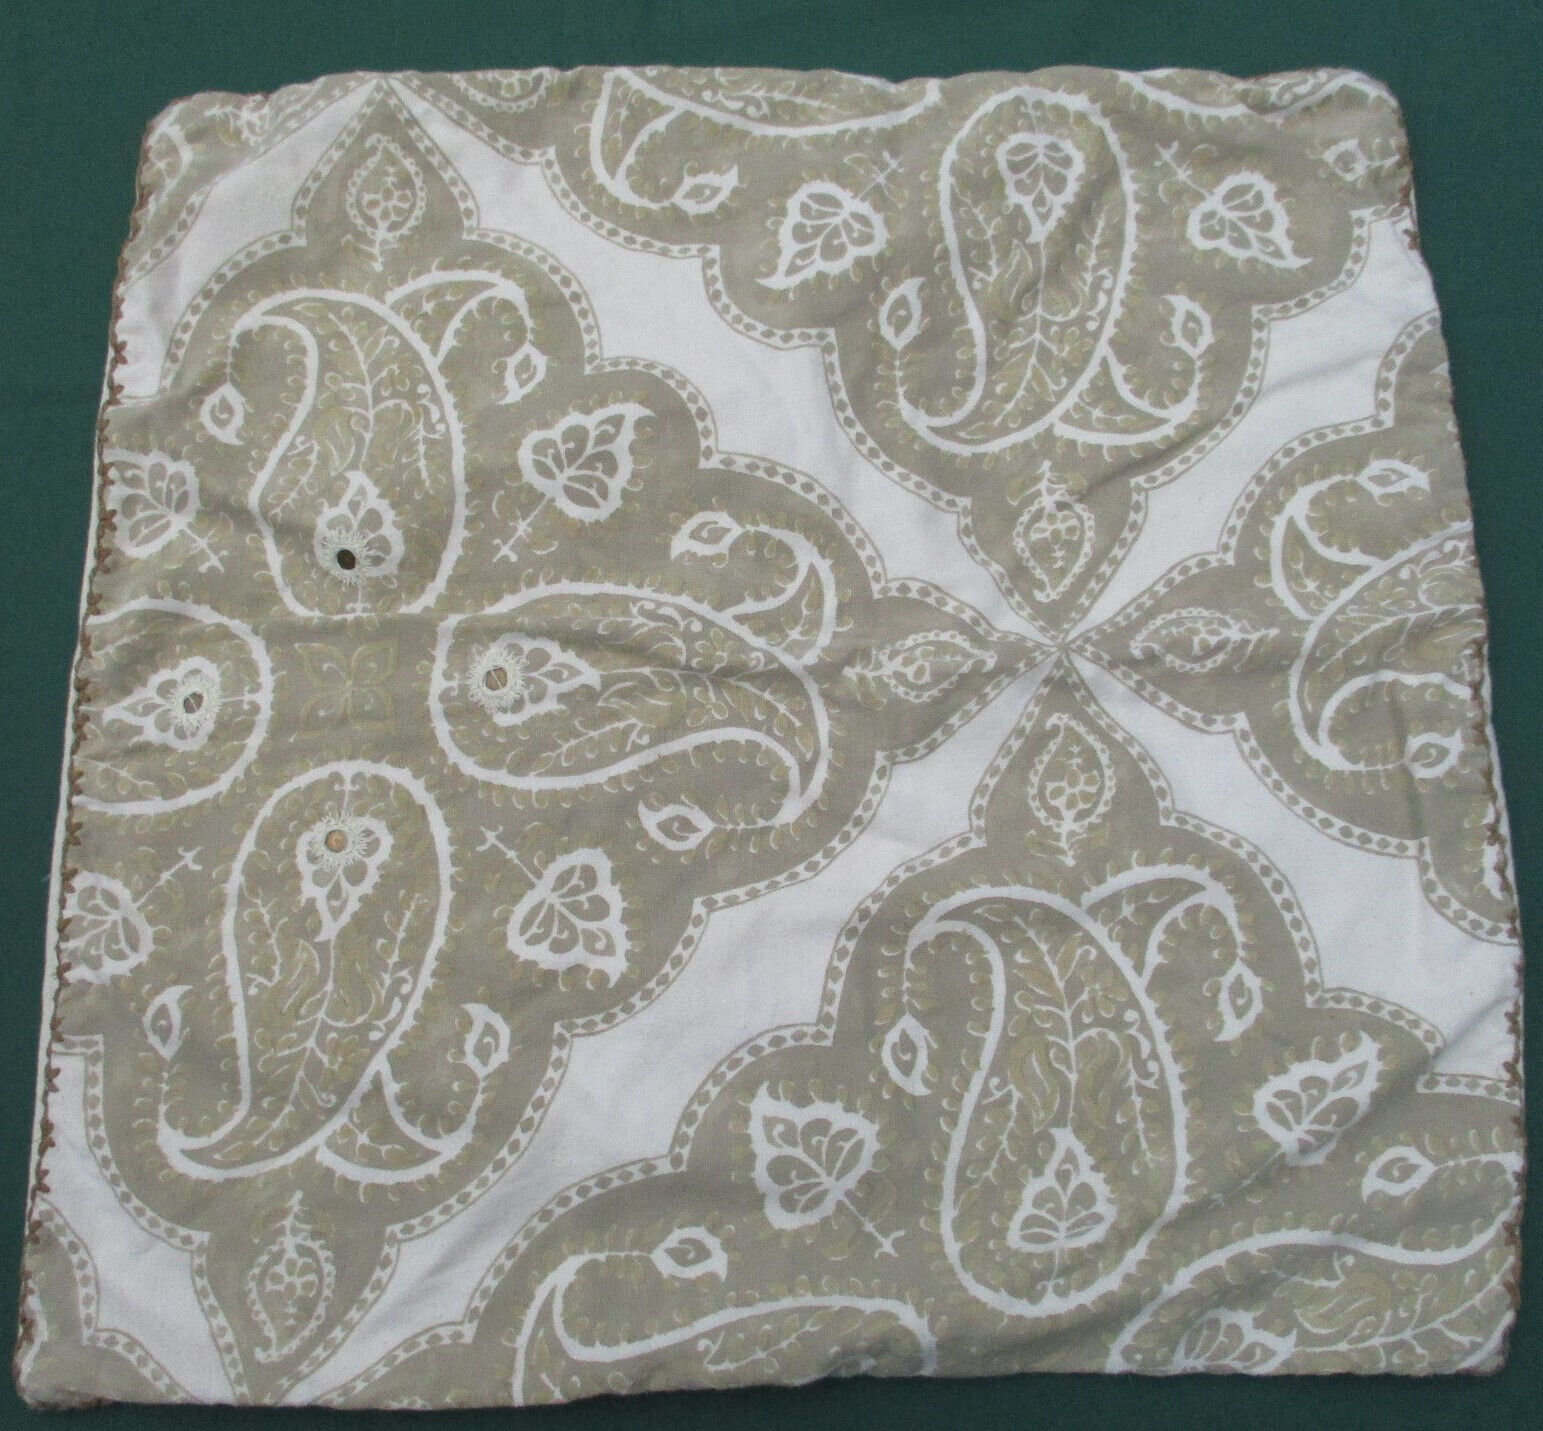 Pottery Barn Cotton Medallion Paisley Taupe and Cream Pillow Sham 24" Square - $20.90